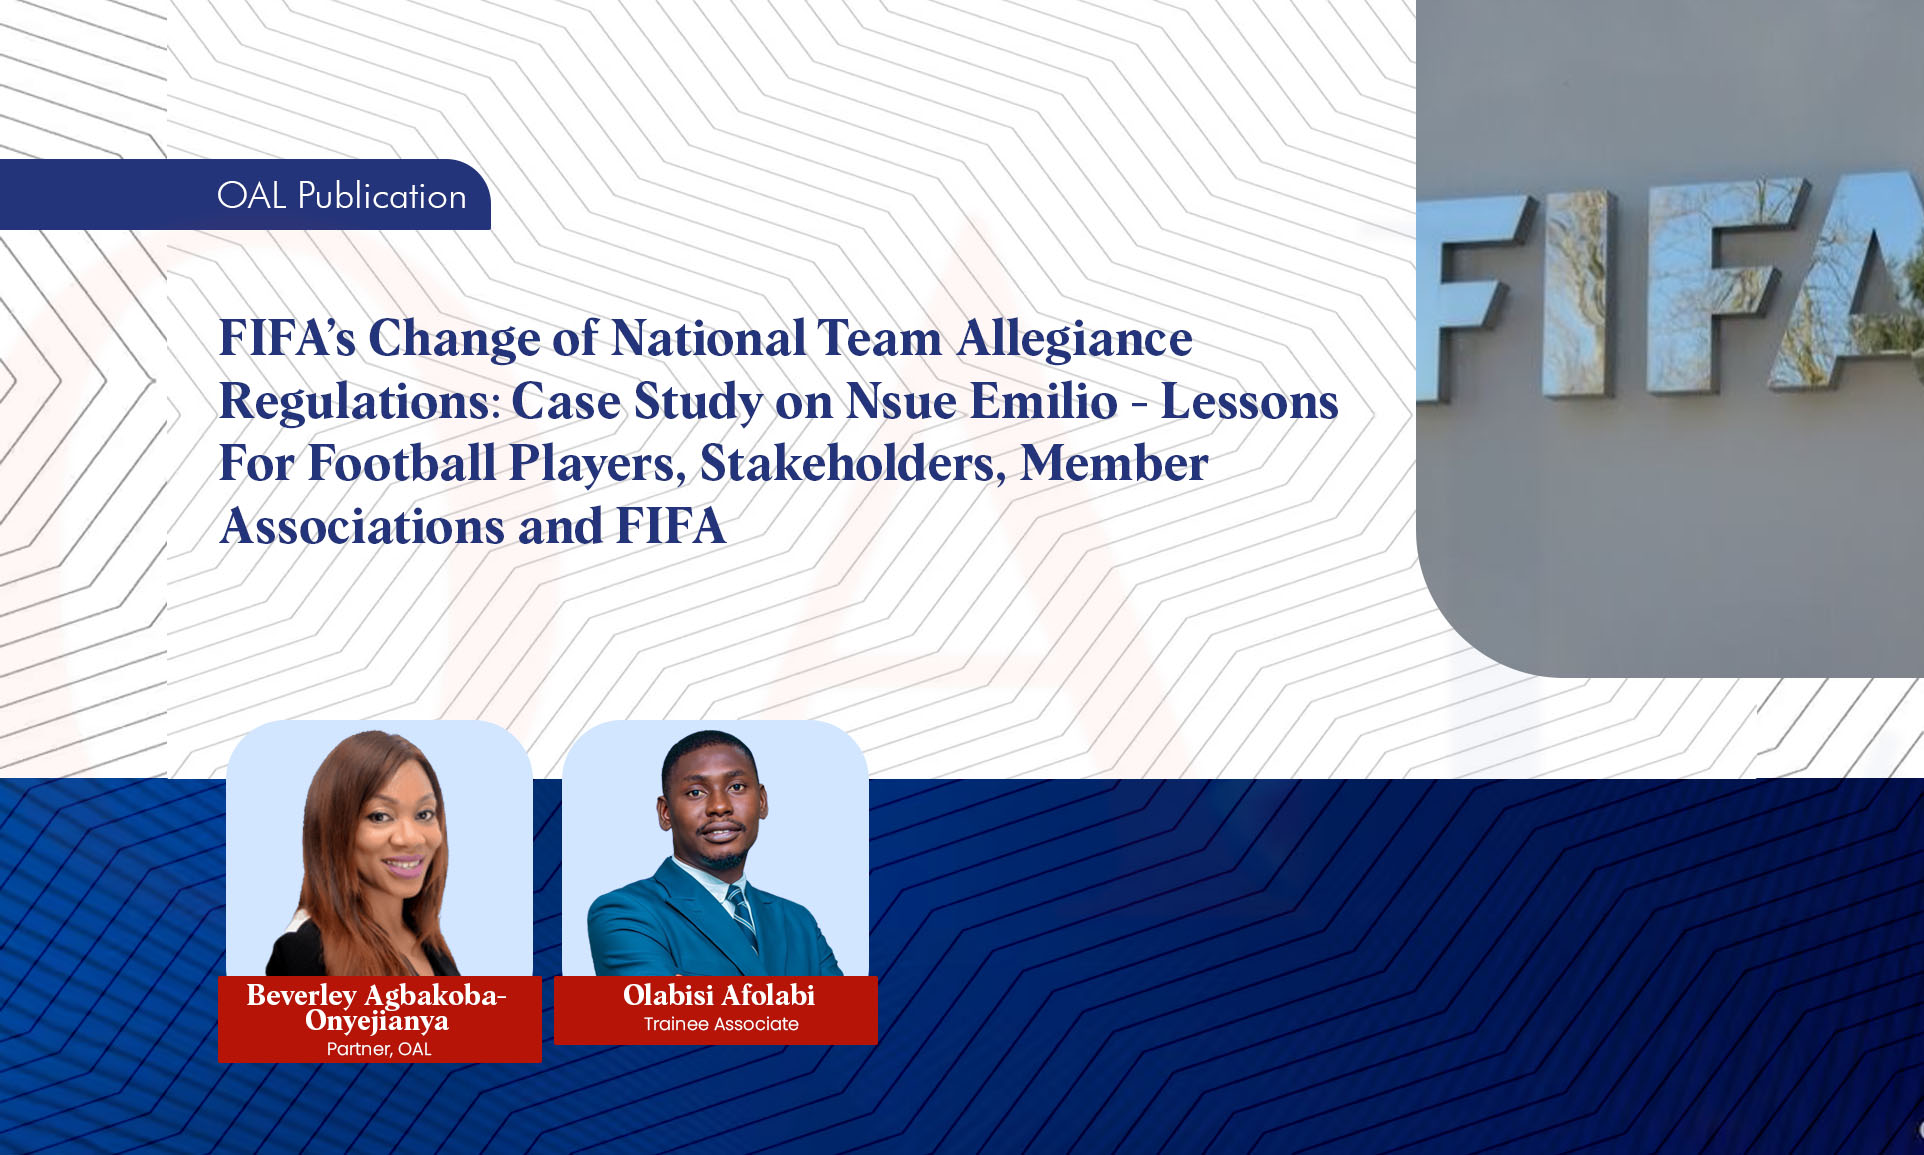 FIFA’s Change of National Team Allegiance Regulations. Case Study on Nsue Emilio - Lessons For Football Players, Stakeholders, Member Associations and FIFA.